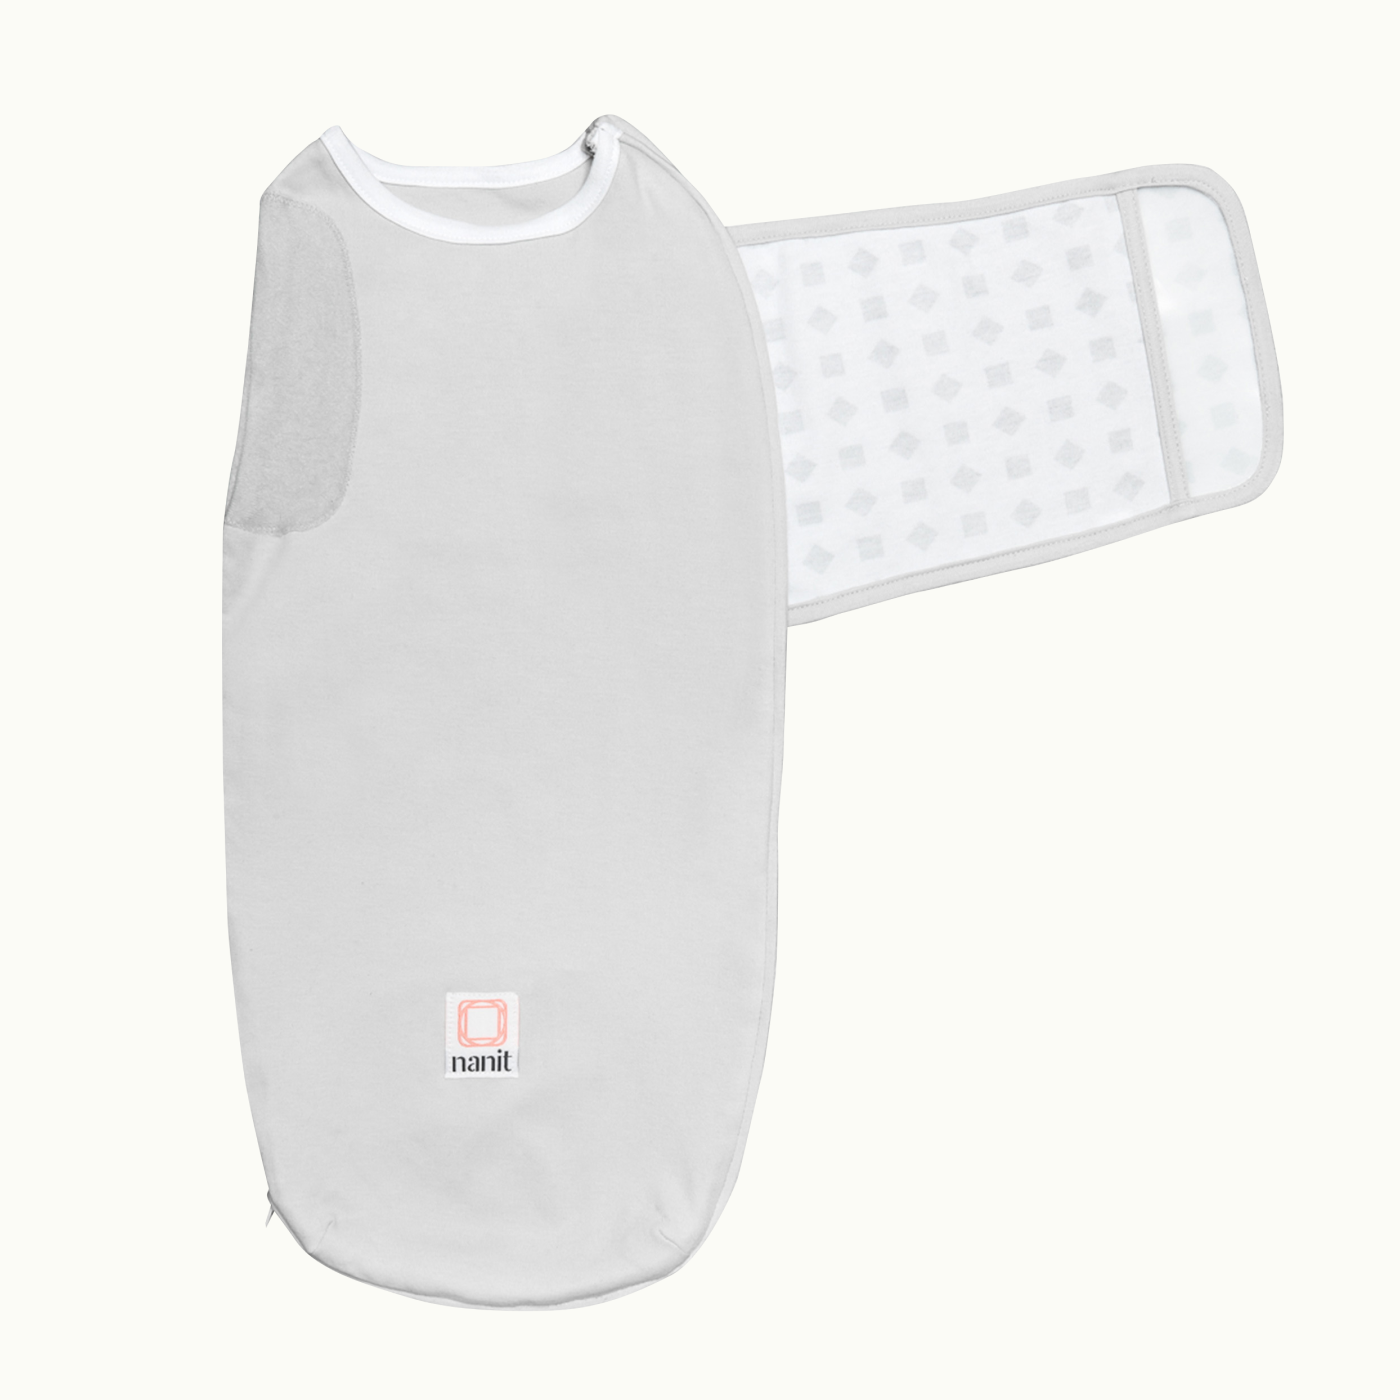 nanit swaddle with velcro off in gray